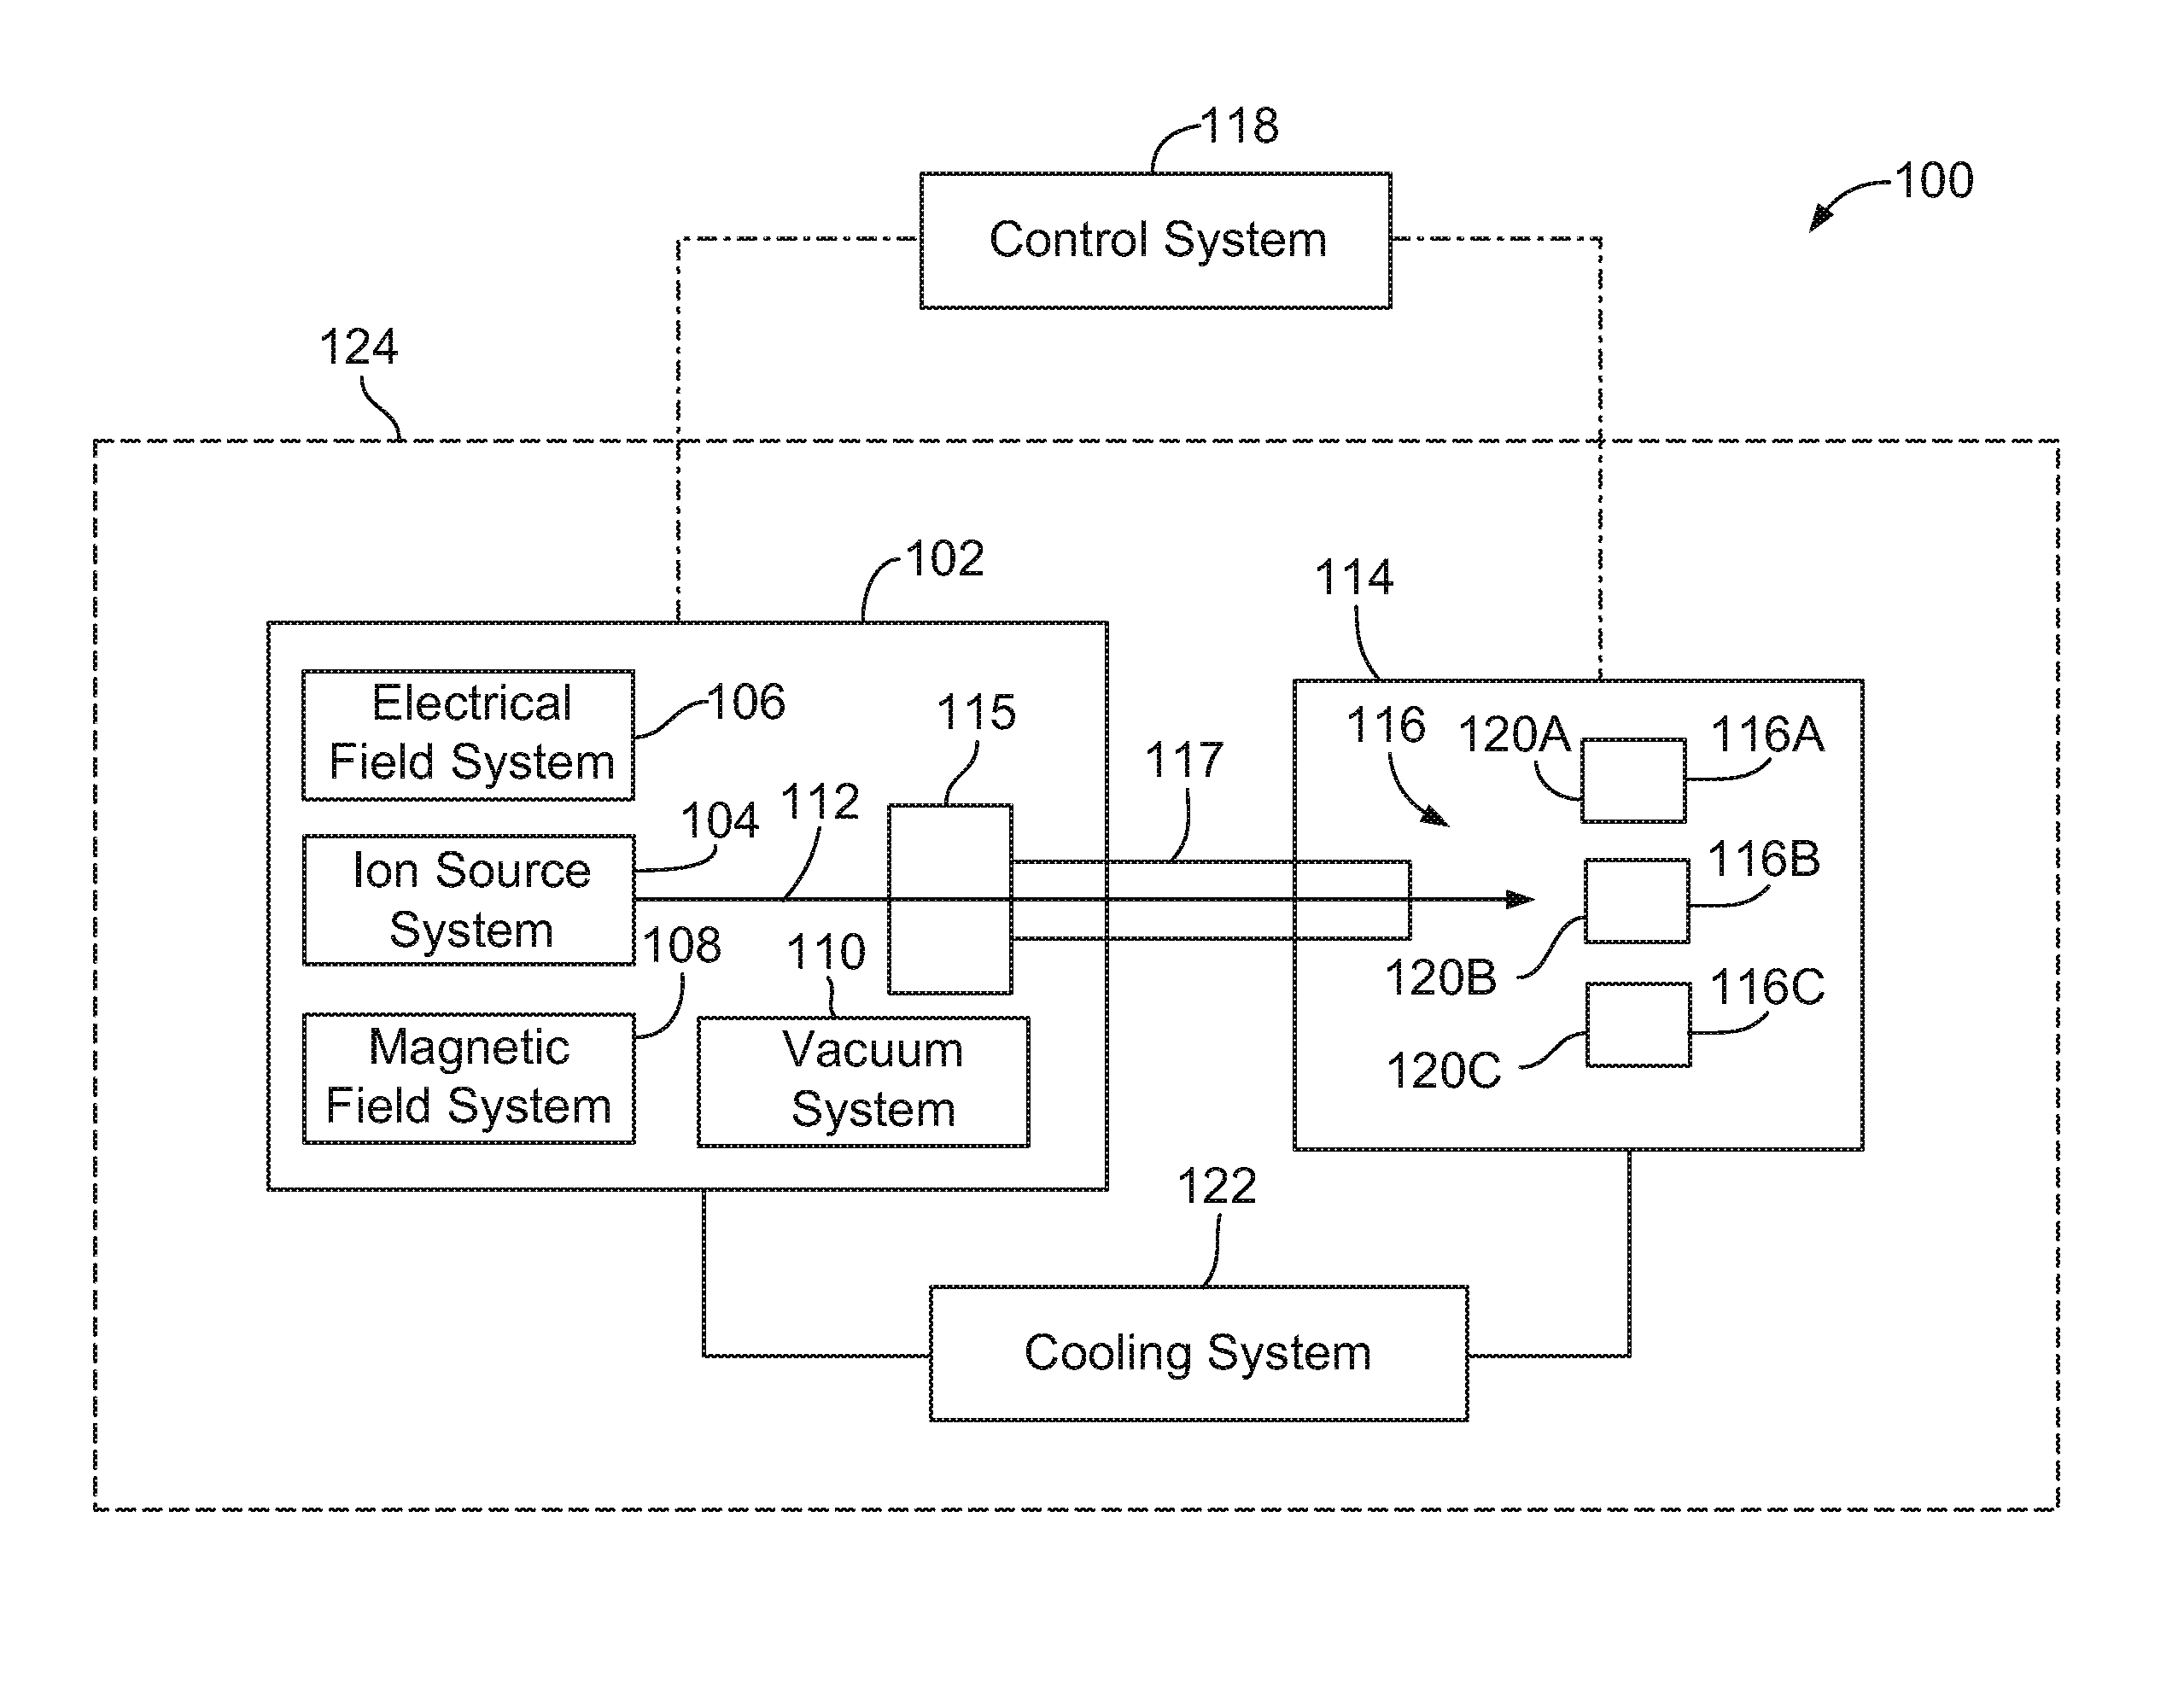 Isotope production system with separated shielding